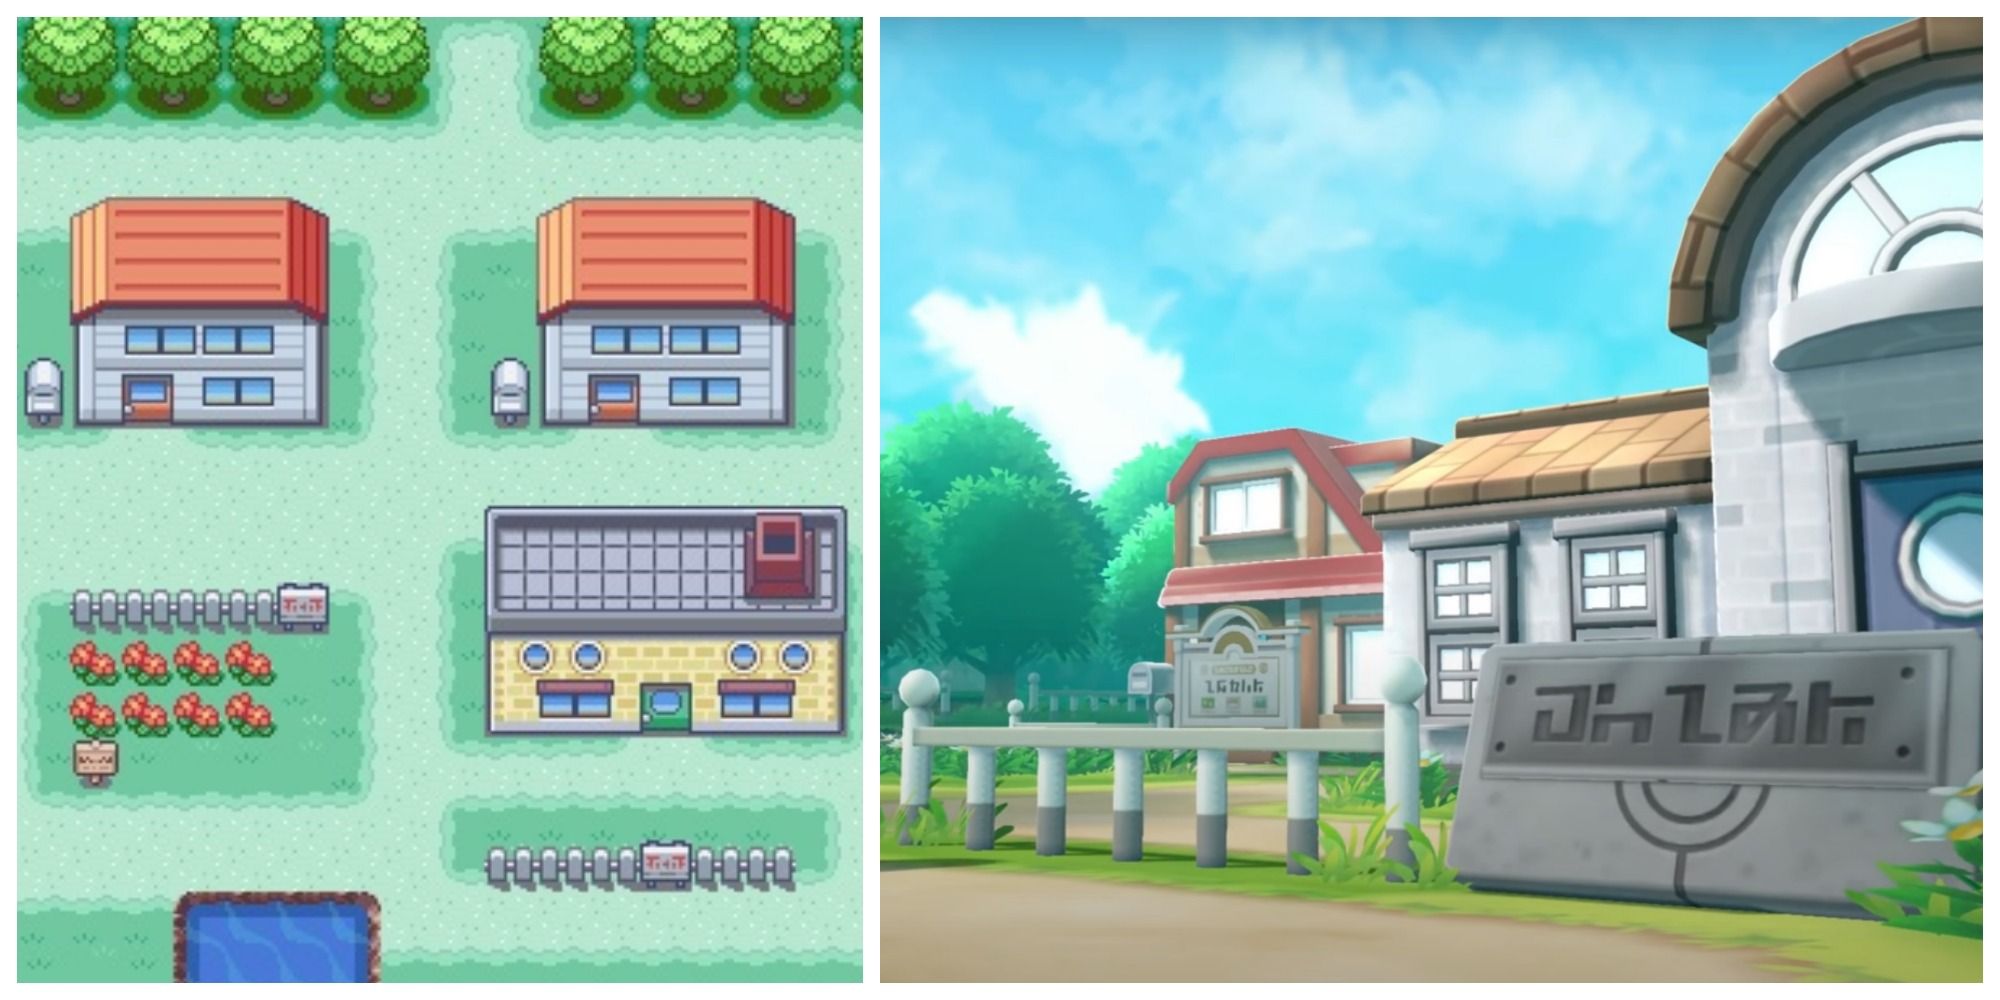 Pallet town Pokémon before and after